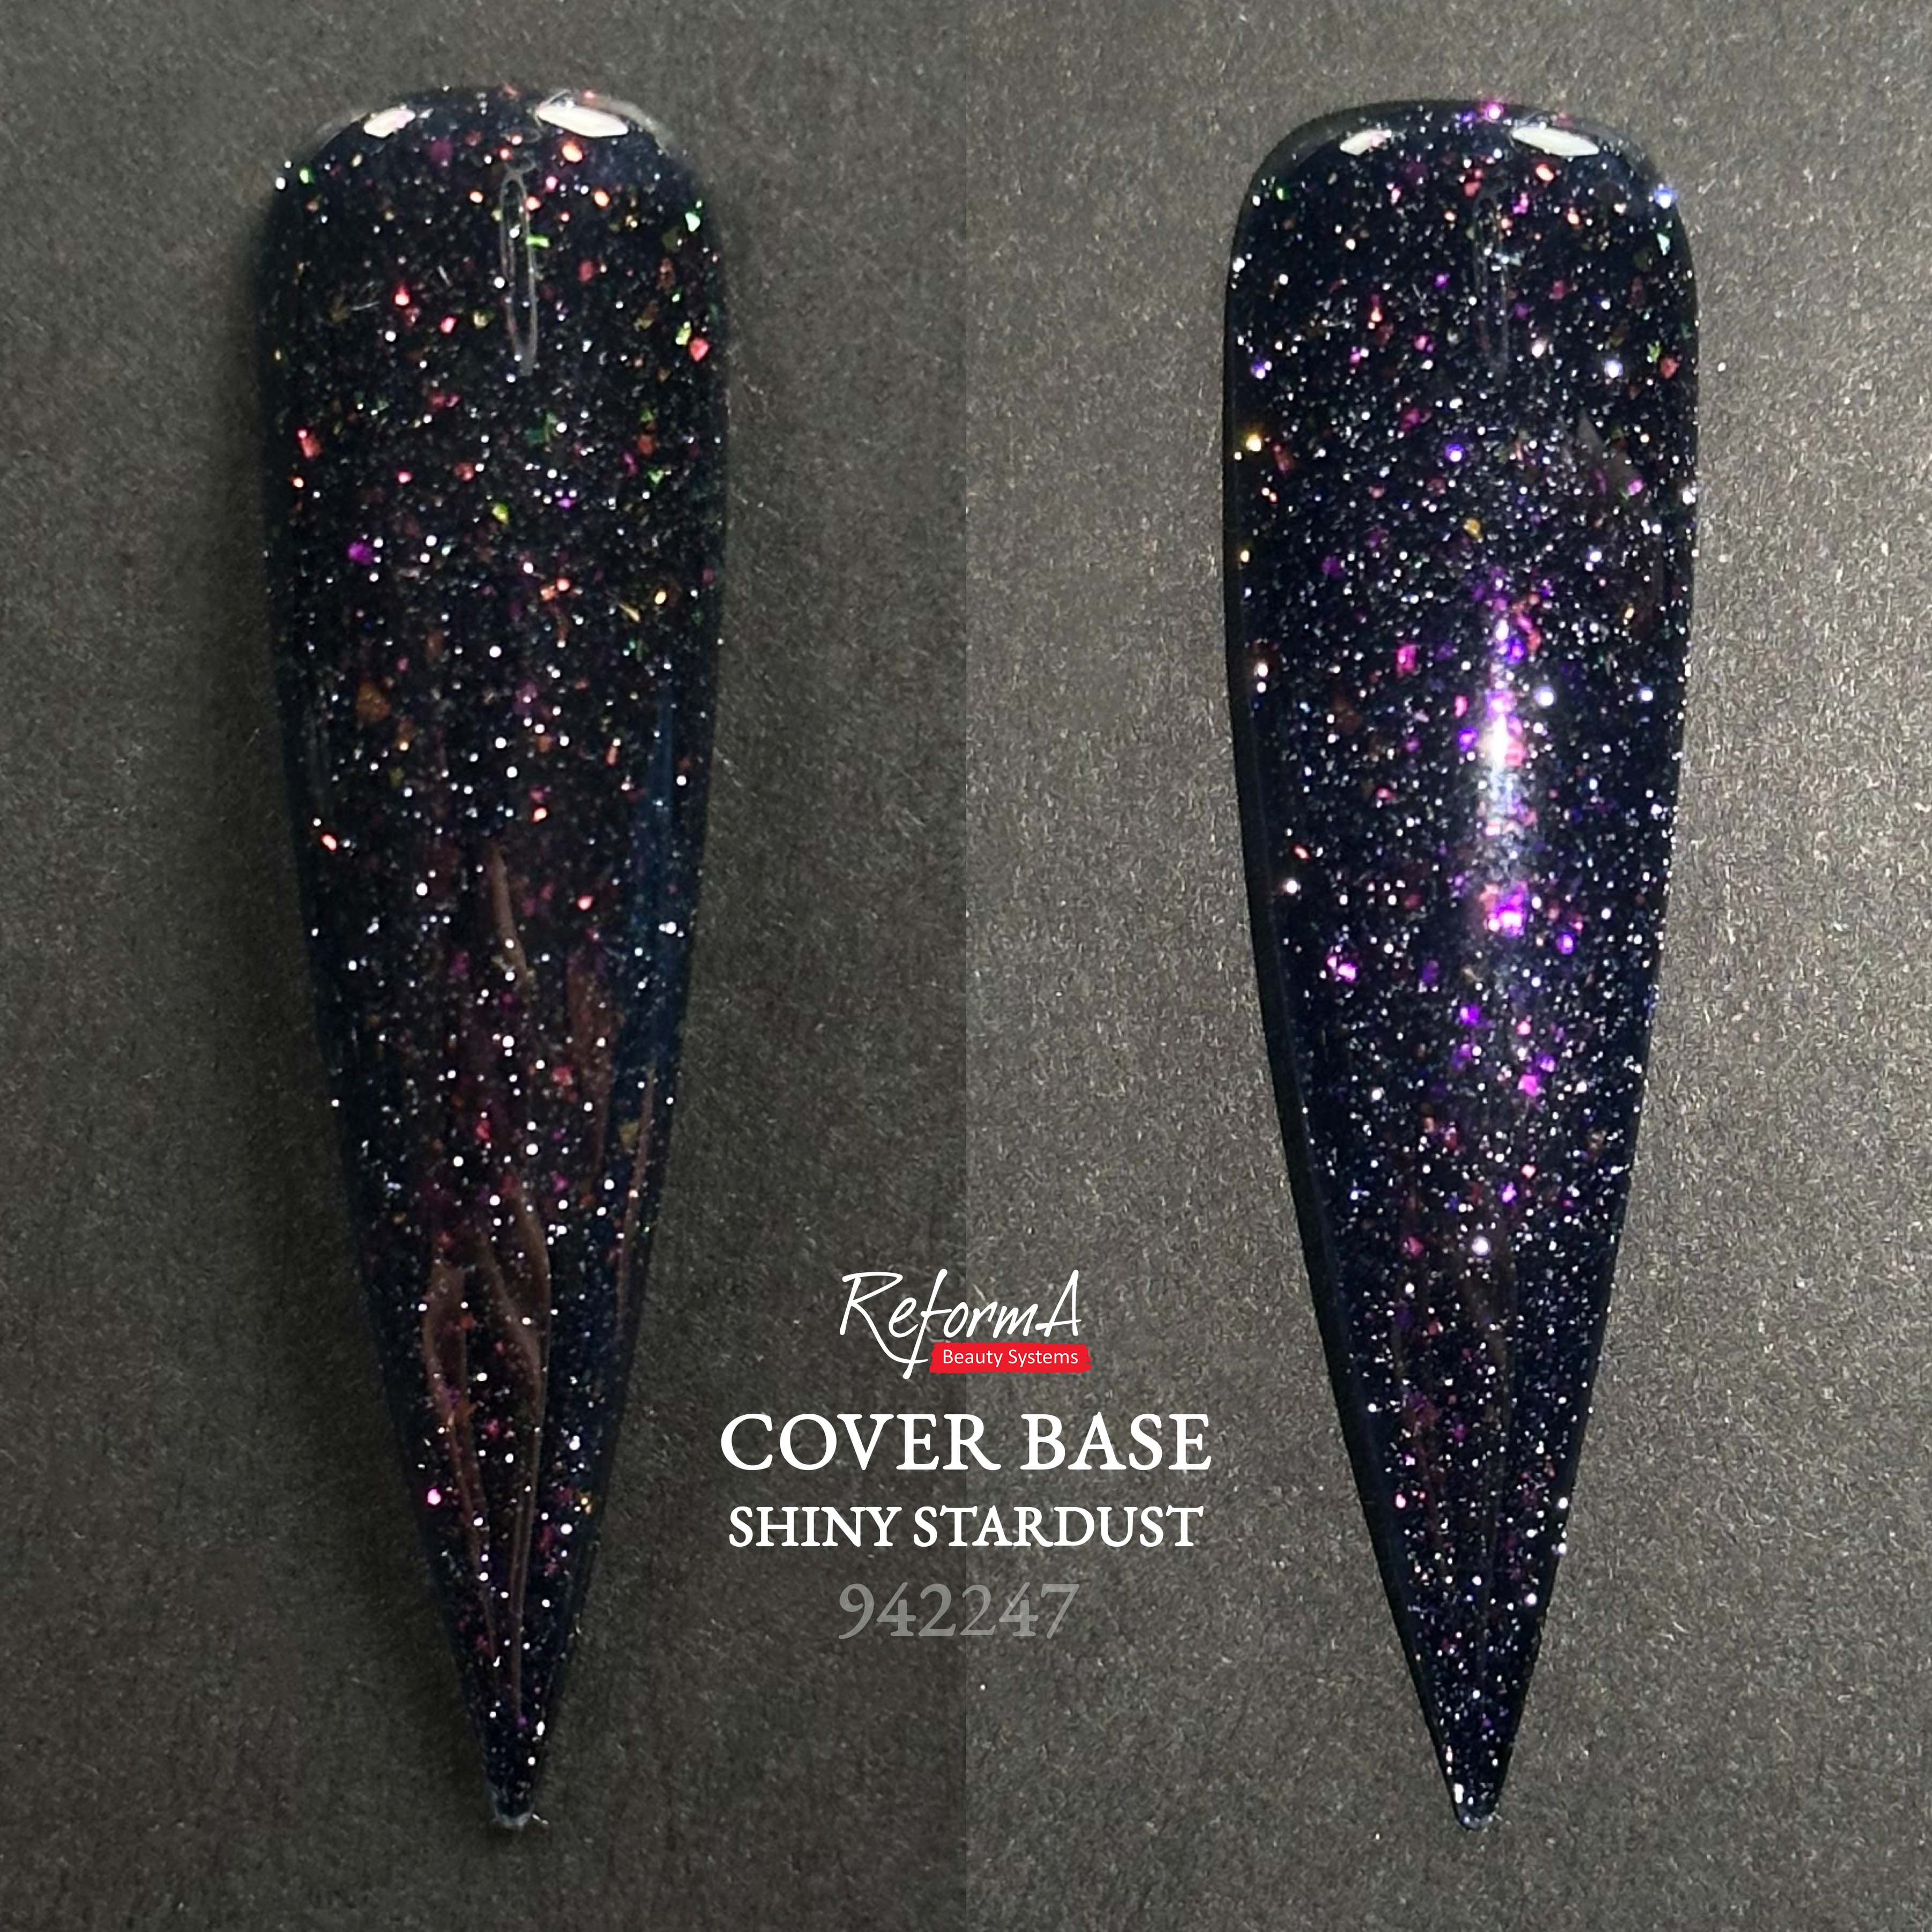 Cover Base - Shiny Stardust, 10 ml